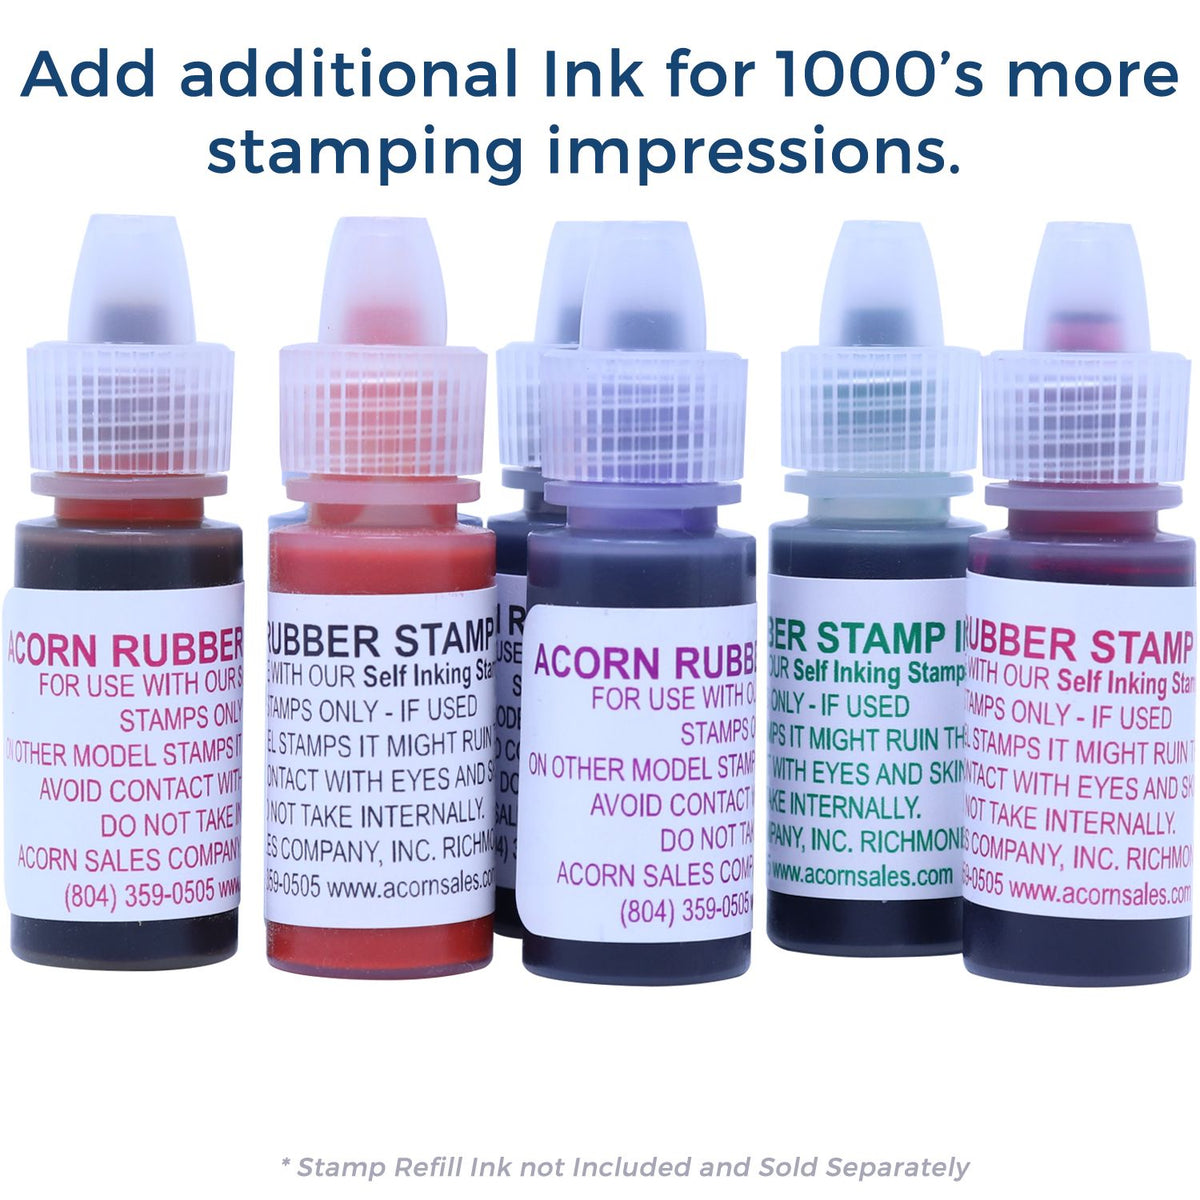 Refill Ink for Self-Inking Round Laughing Smiley Stamp Available